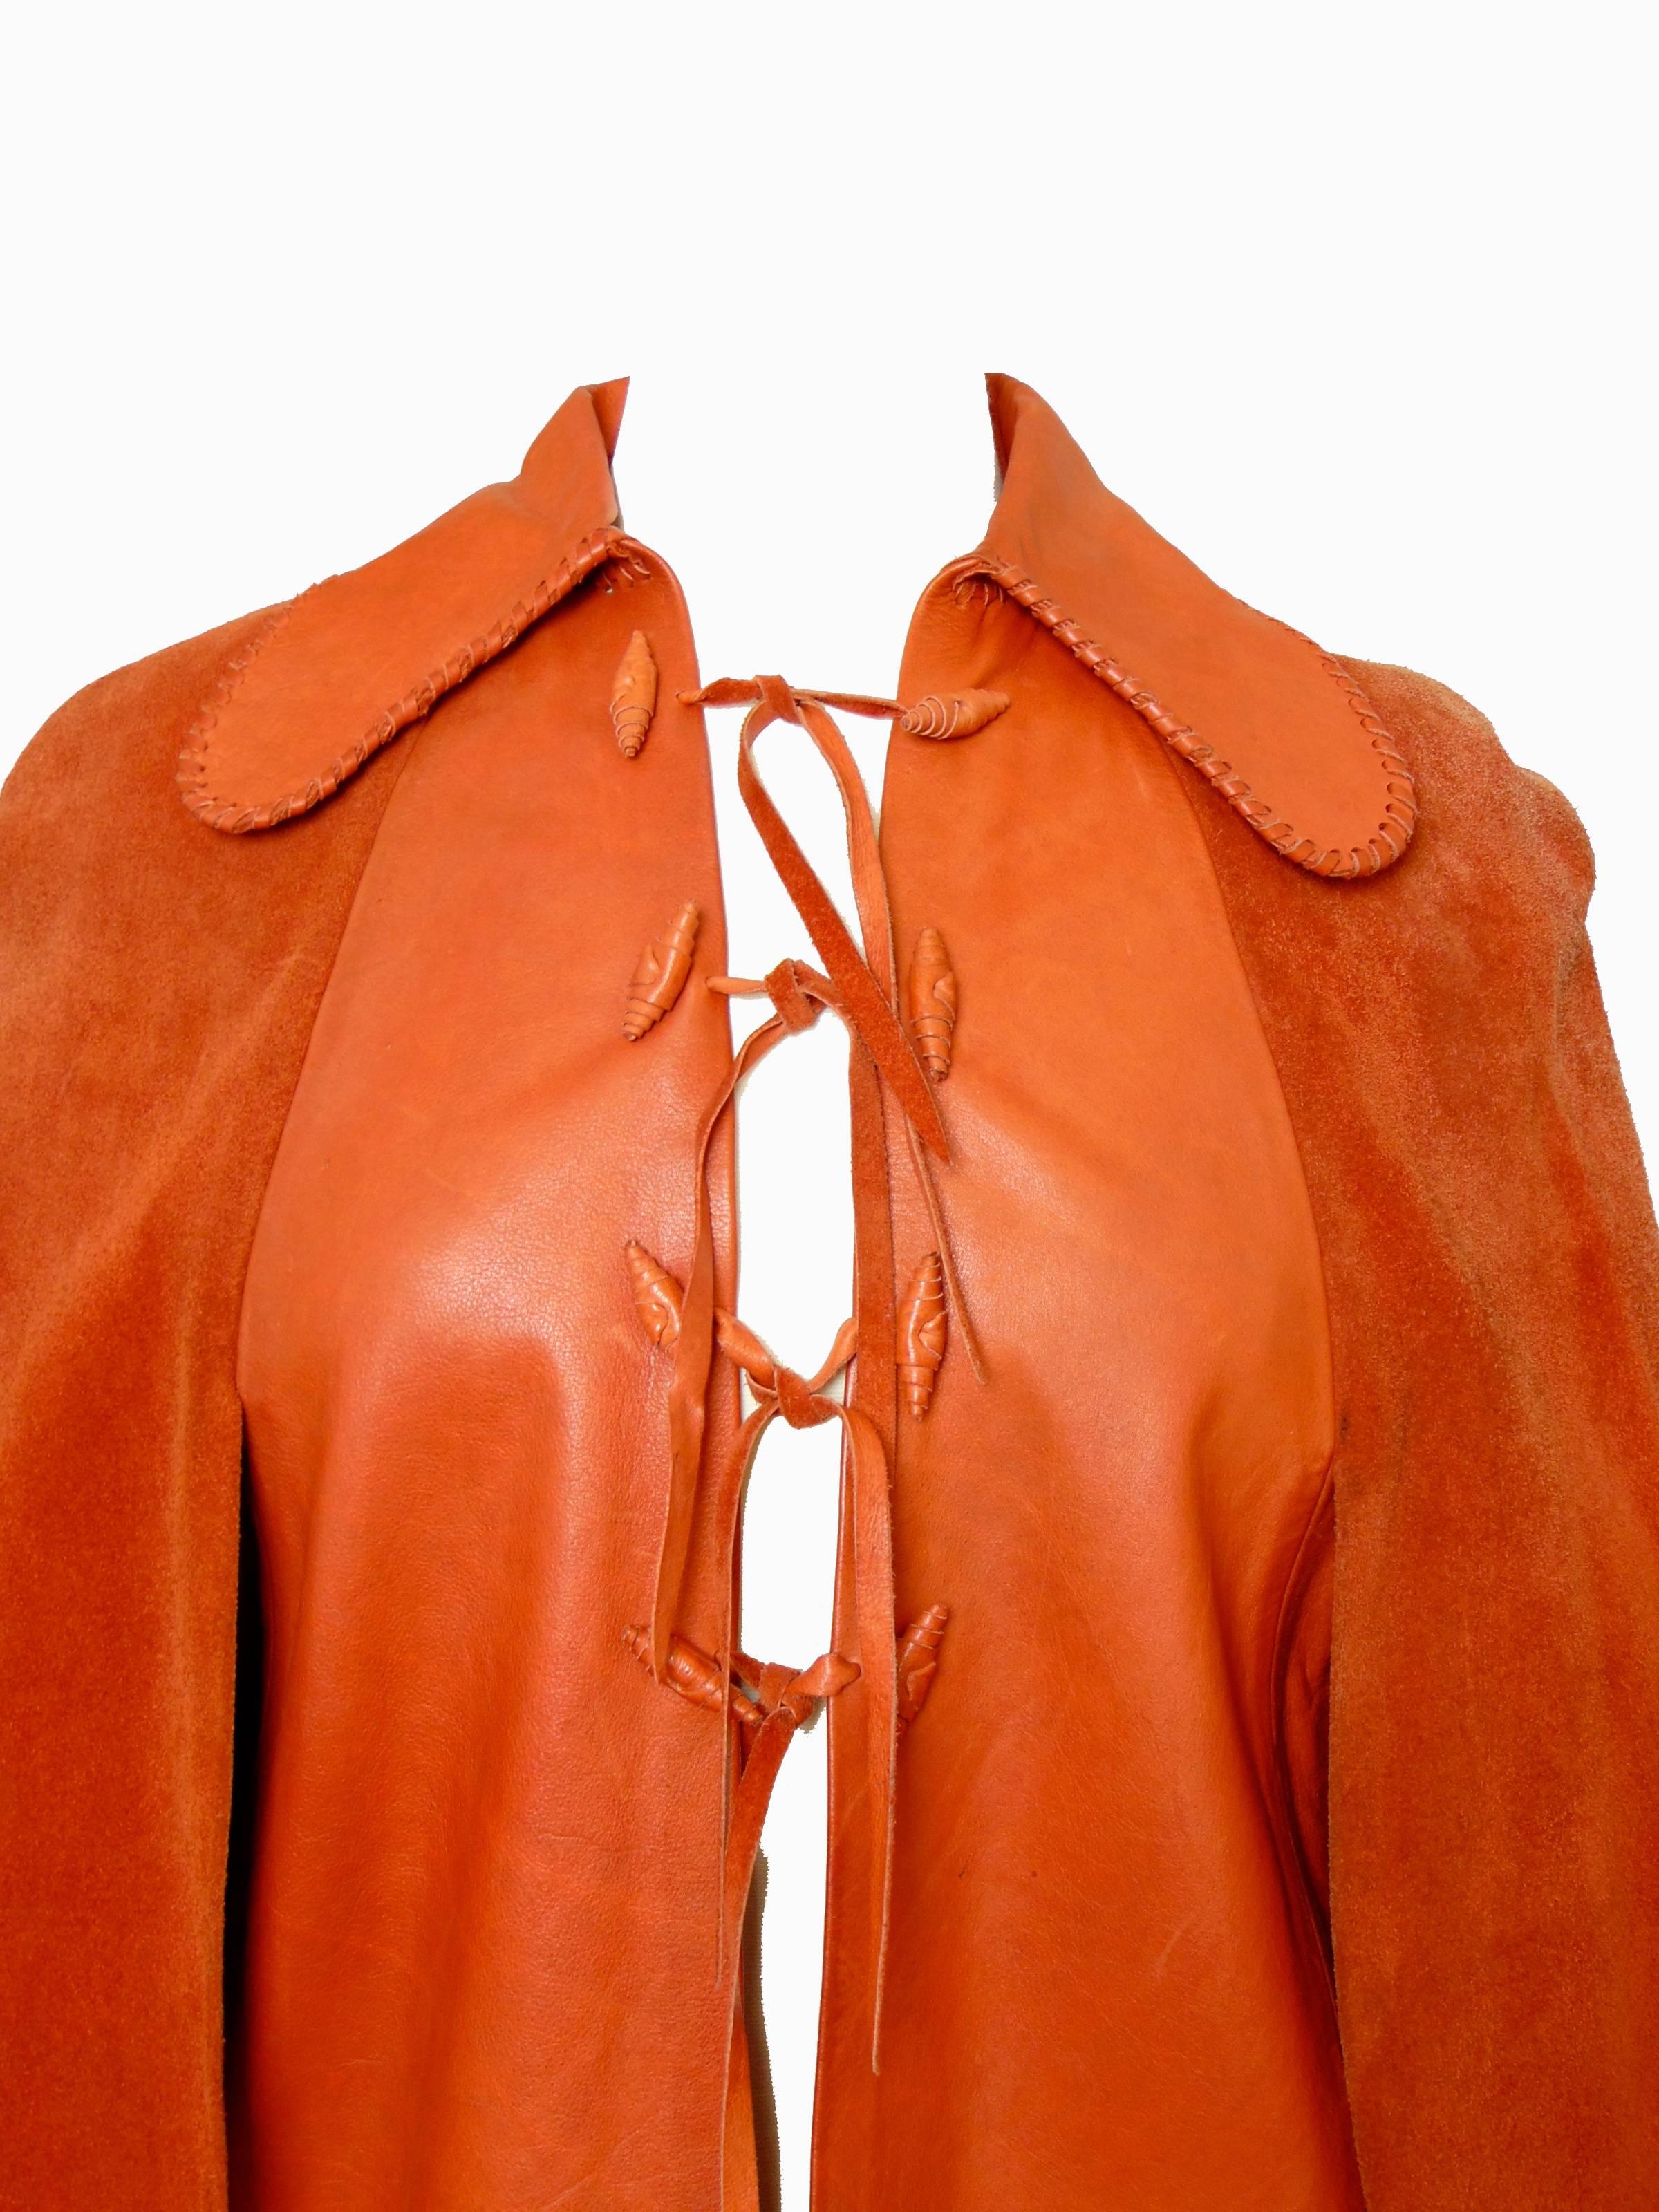 Char Leather Handpainted Cape with Suede Caplets Mexico Vintage 1970s  3